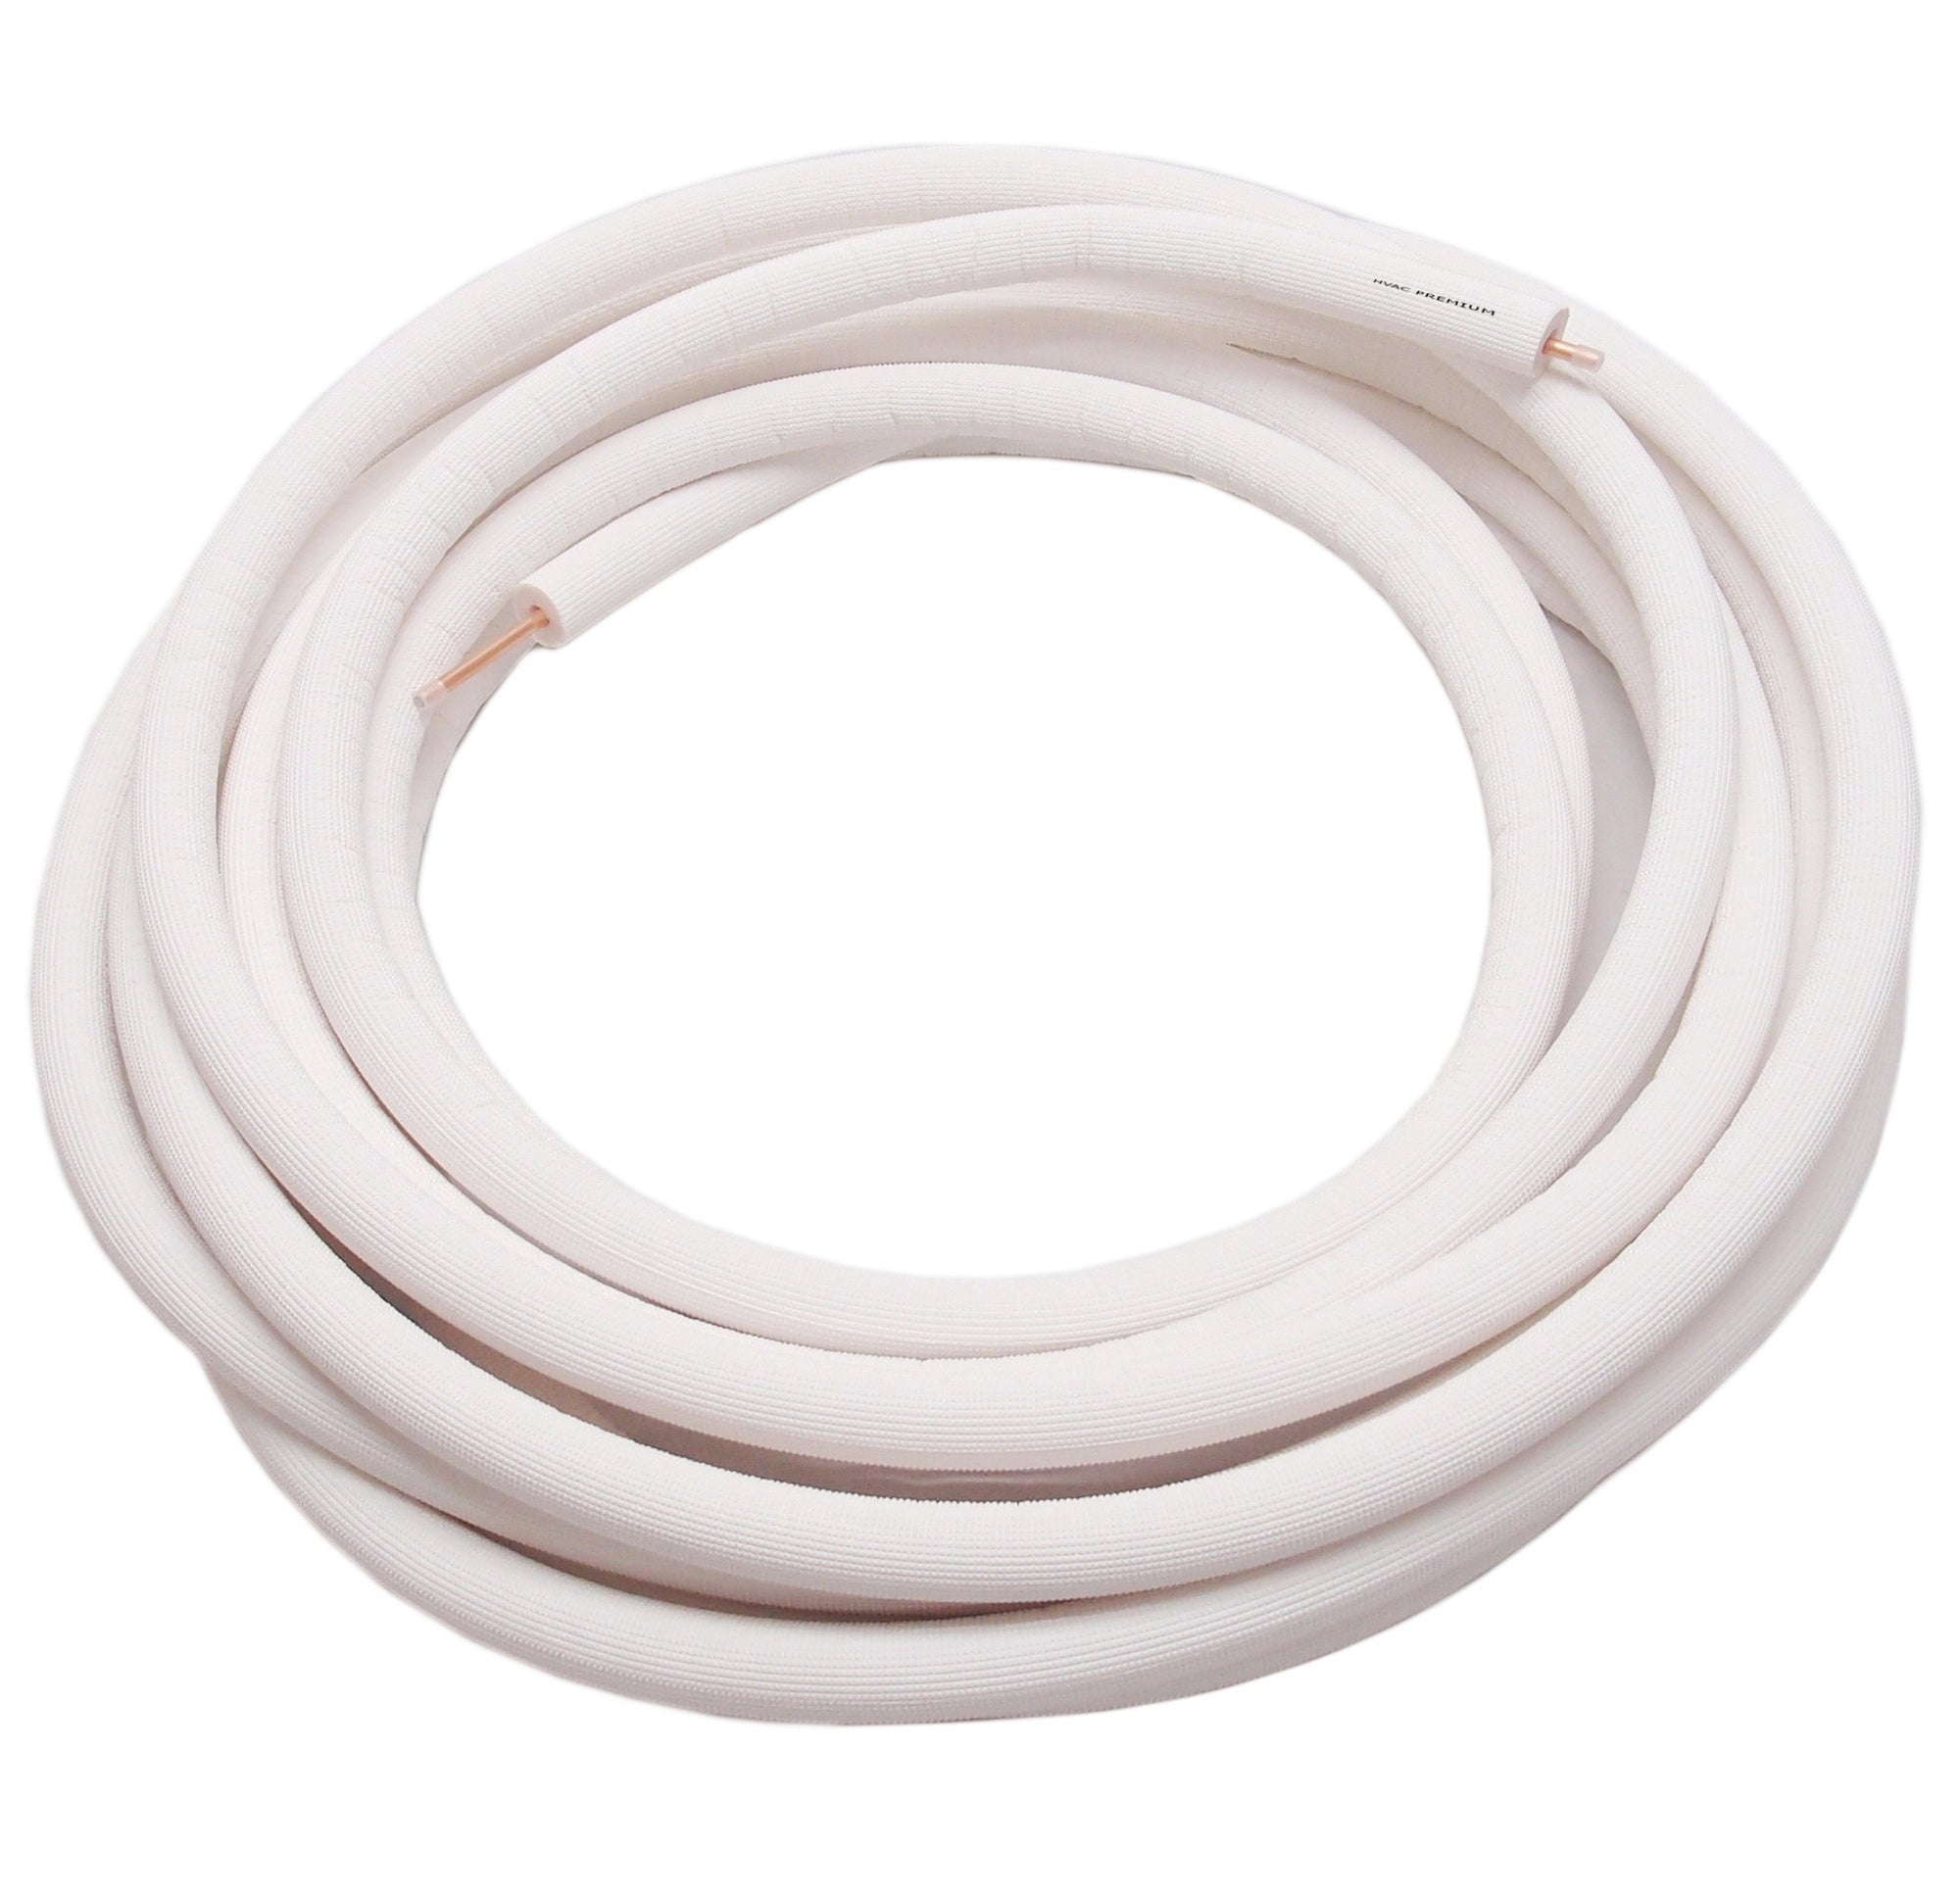 3/4" Insulated Copper Coil Line - Seamless Pipe Tube for HVAC, Refrigerant - 1/2" White Insulation - 35' Long